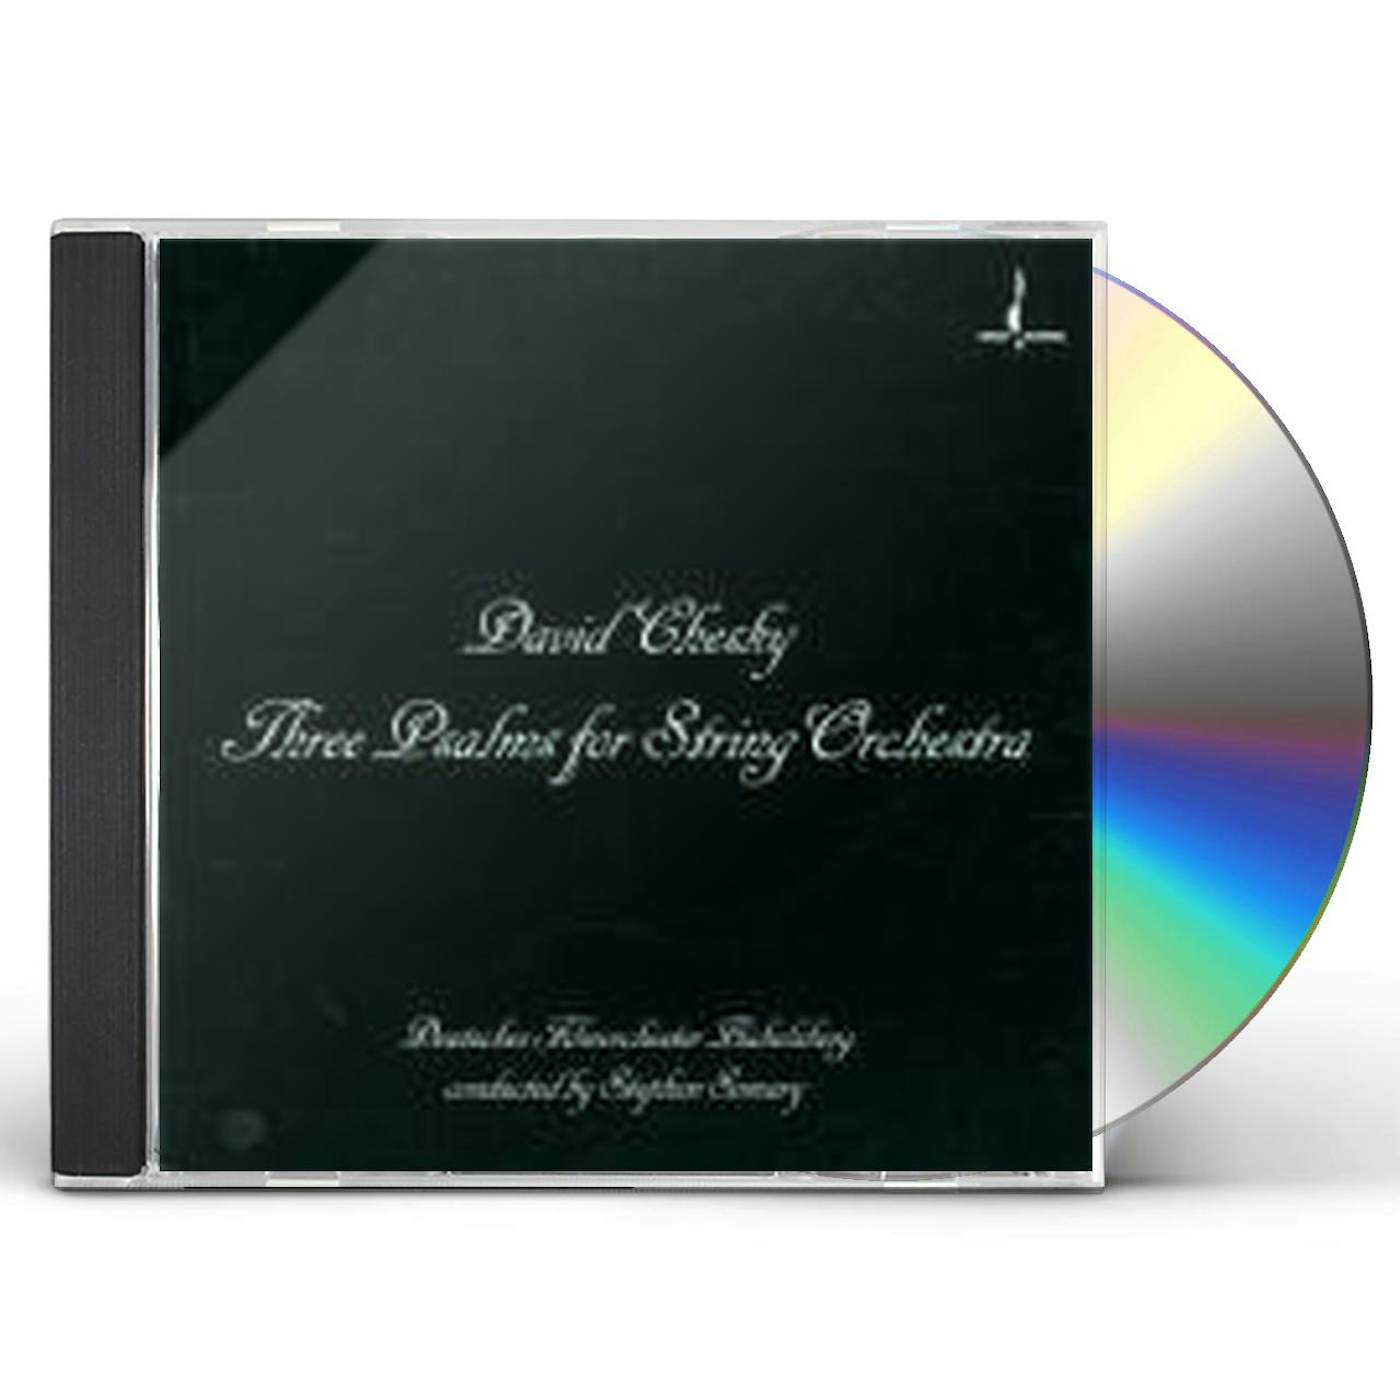 David Chesky 3 PSALMS FOR STRING ORCHESTRA CD